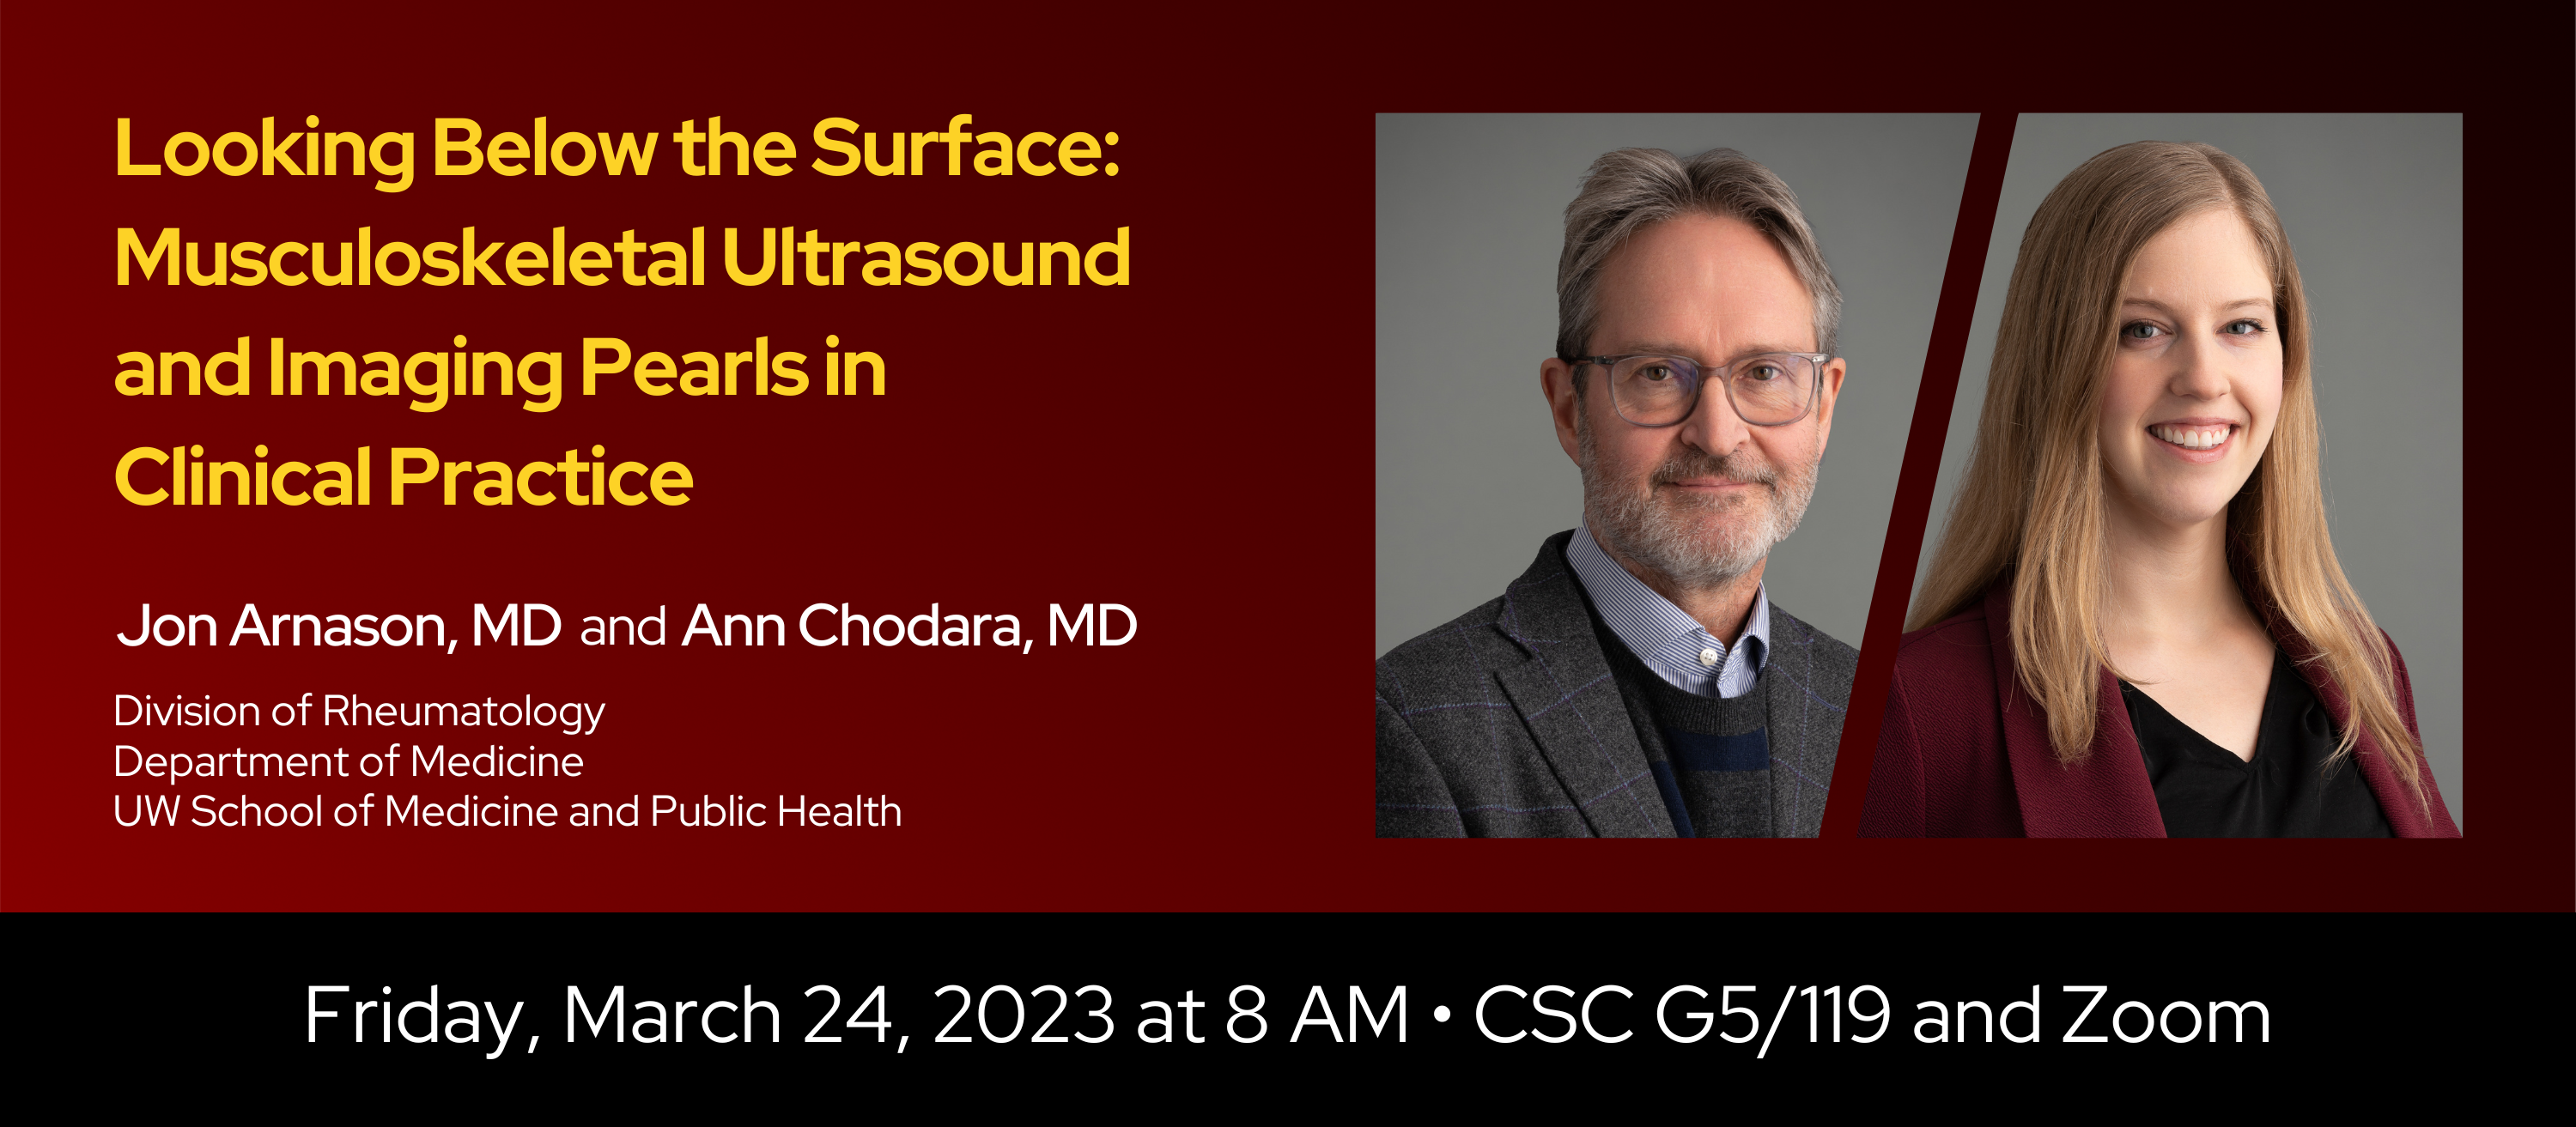 Title: Looking Below the Surface: Musculoskeletal Ultrasound and Imaging Pearls in Clinical Practice